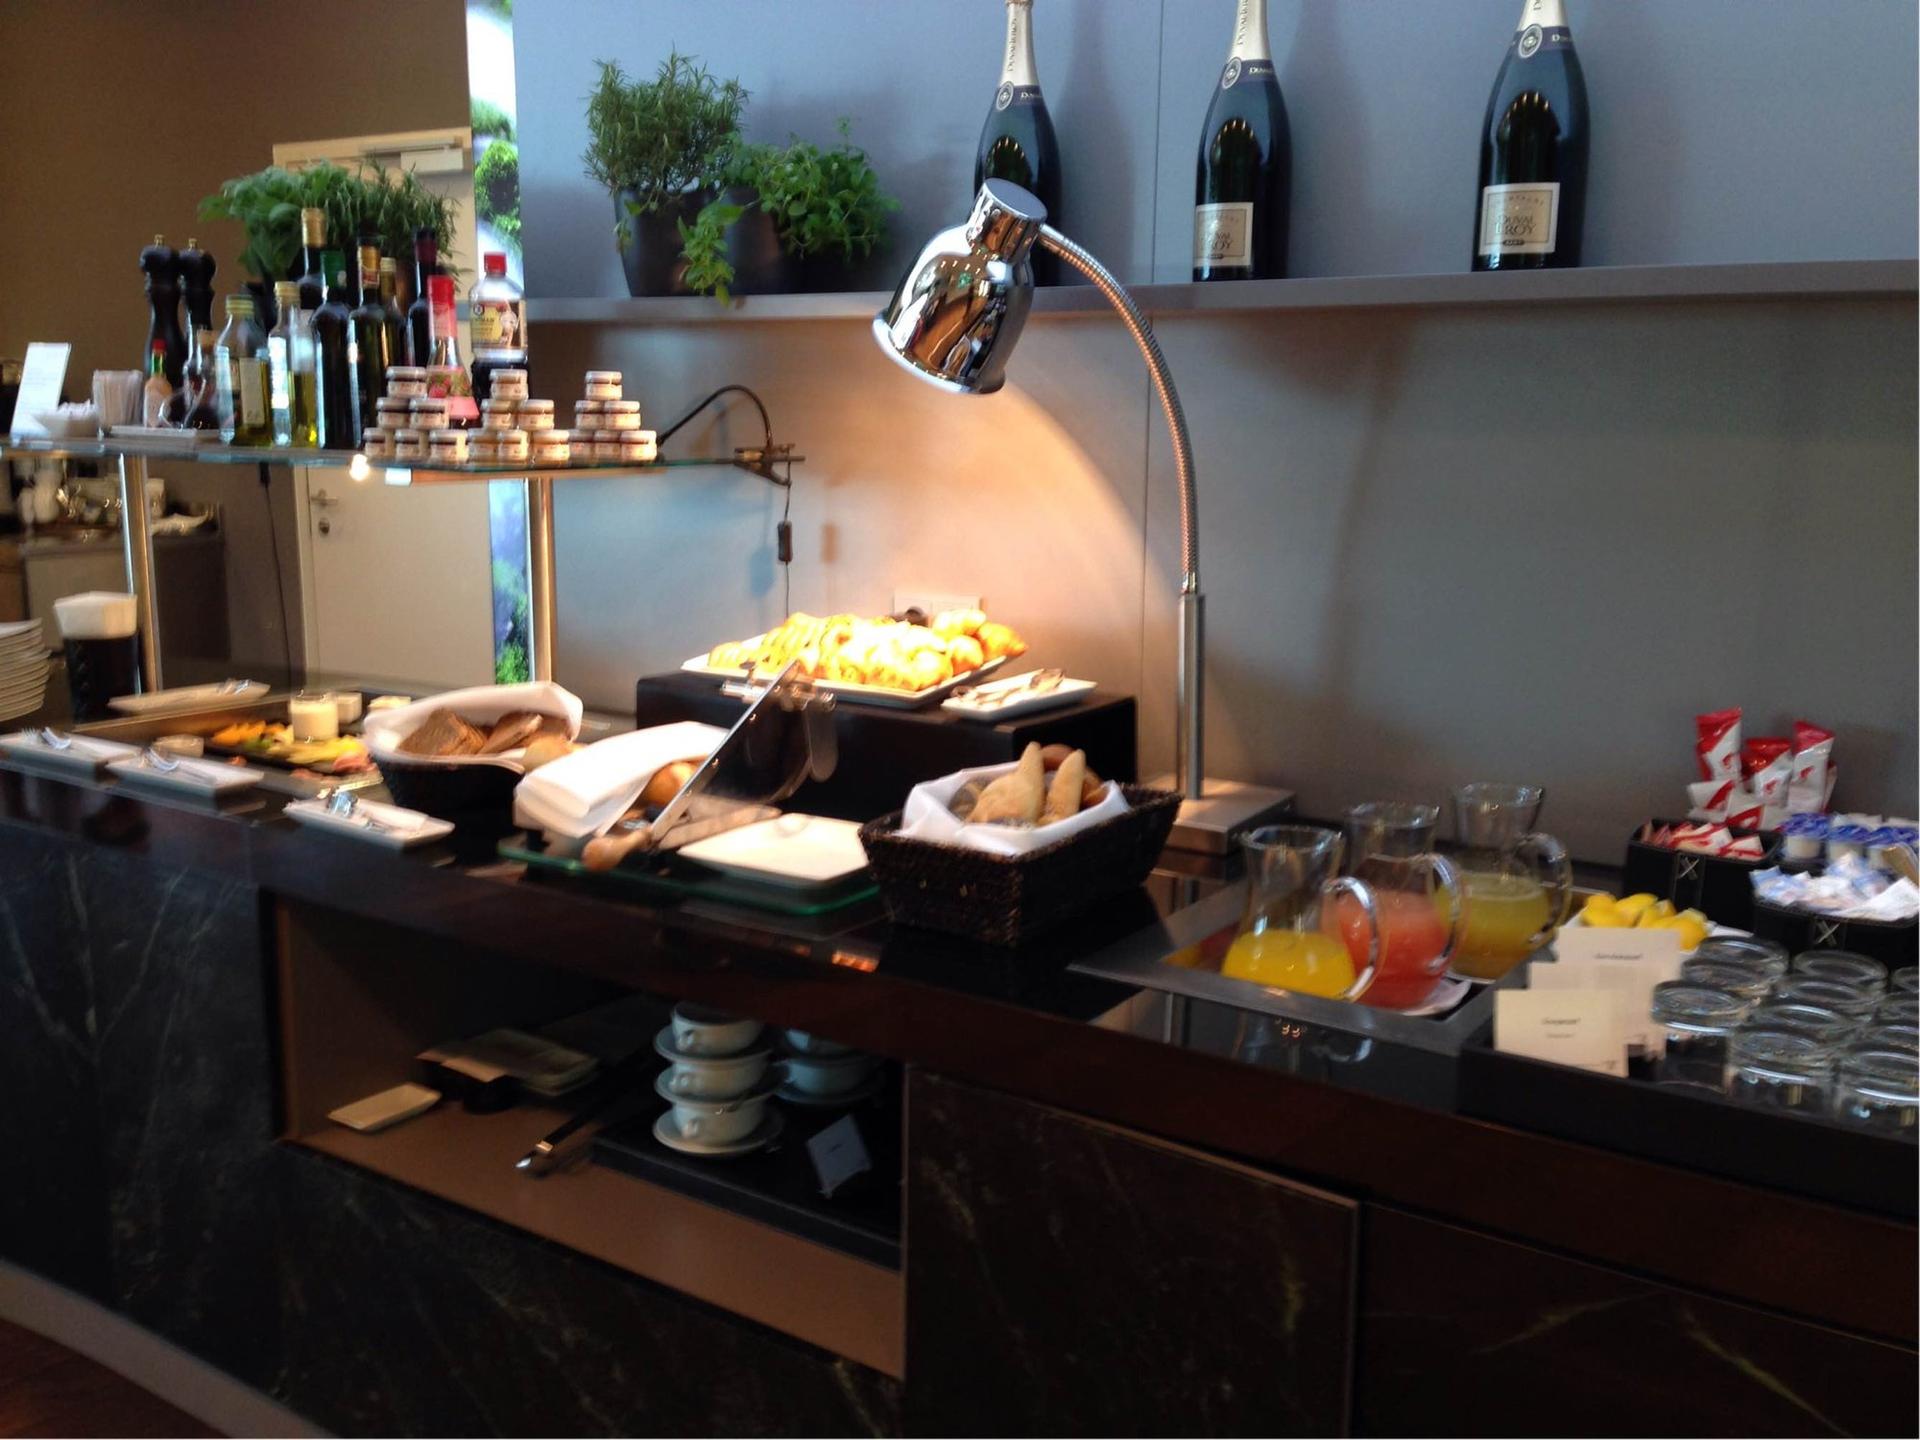 Austrian Airlines HON Circle Lounge image 2 of 5